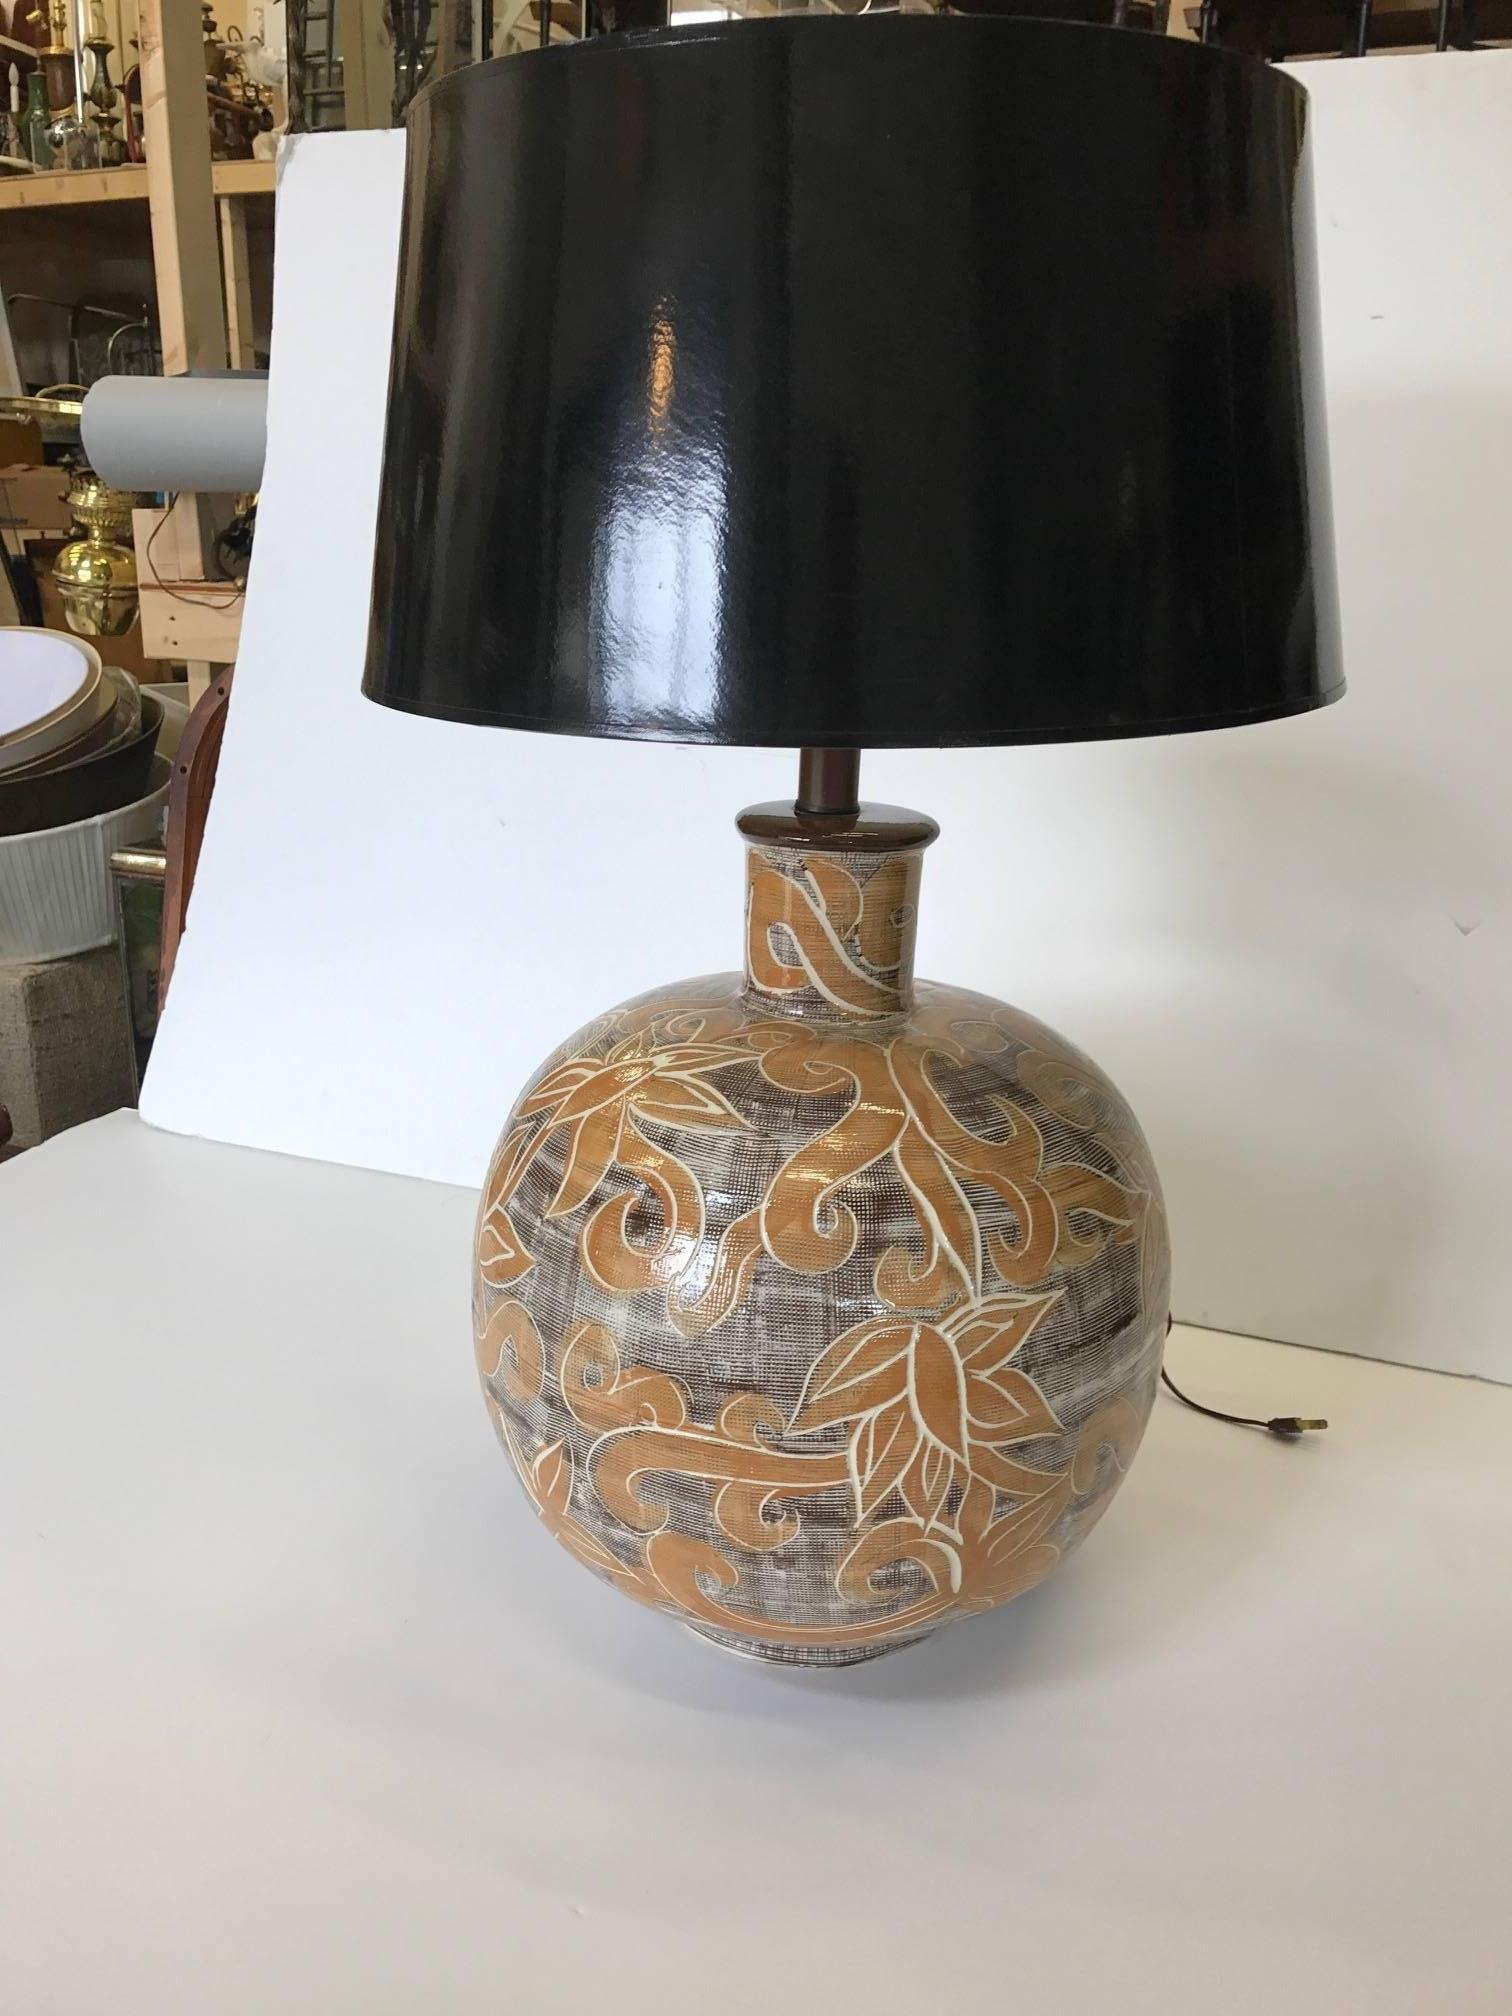 Vibrant Mid-Century Modern ceramic lamp. The large bulbous shape with abstract floral decoration and caved outline set off on a taupe-gray textured background. The shade is for photographic purposes only and not included with this lamp.
Measures: 32